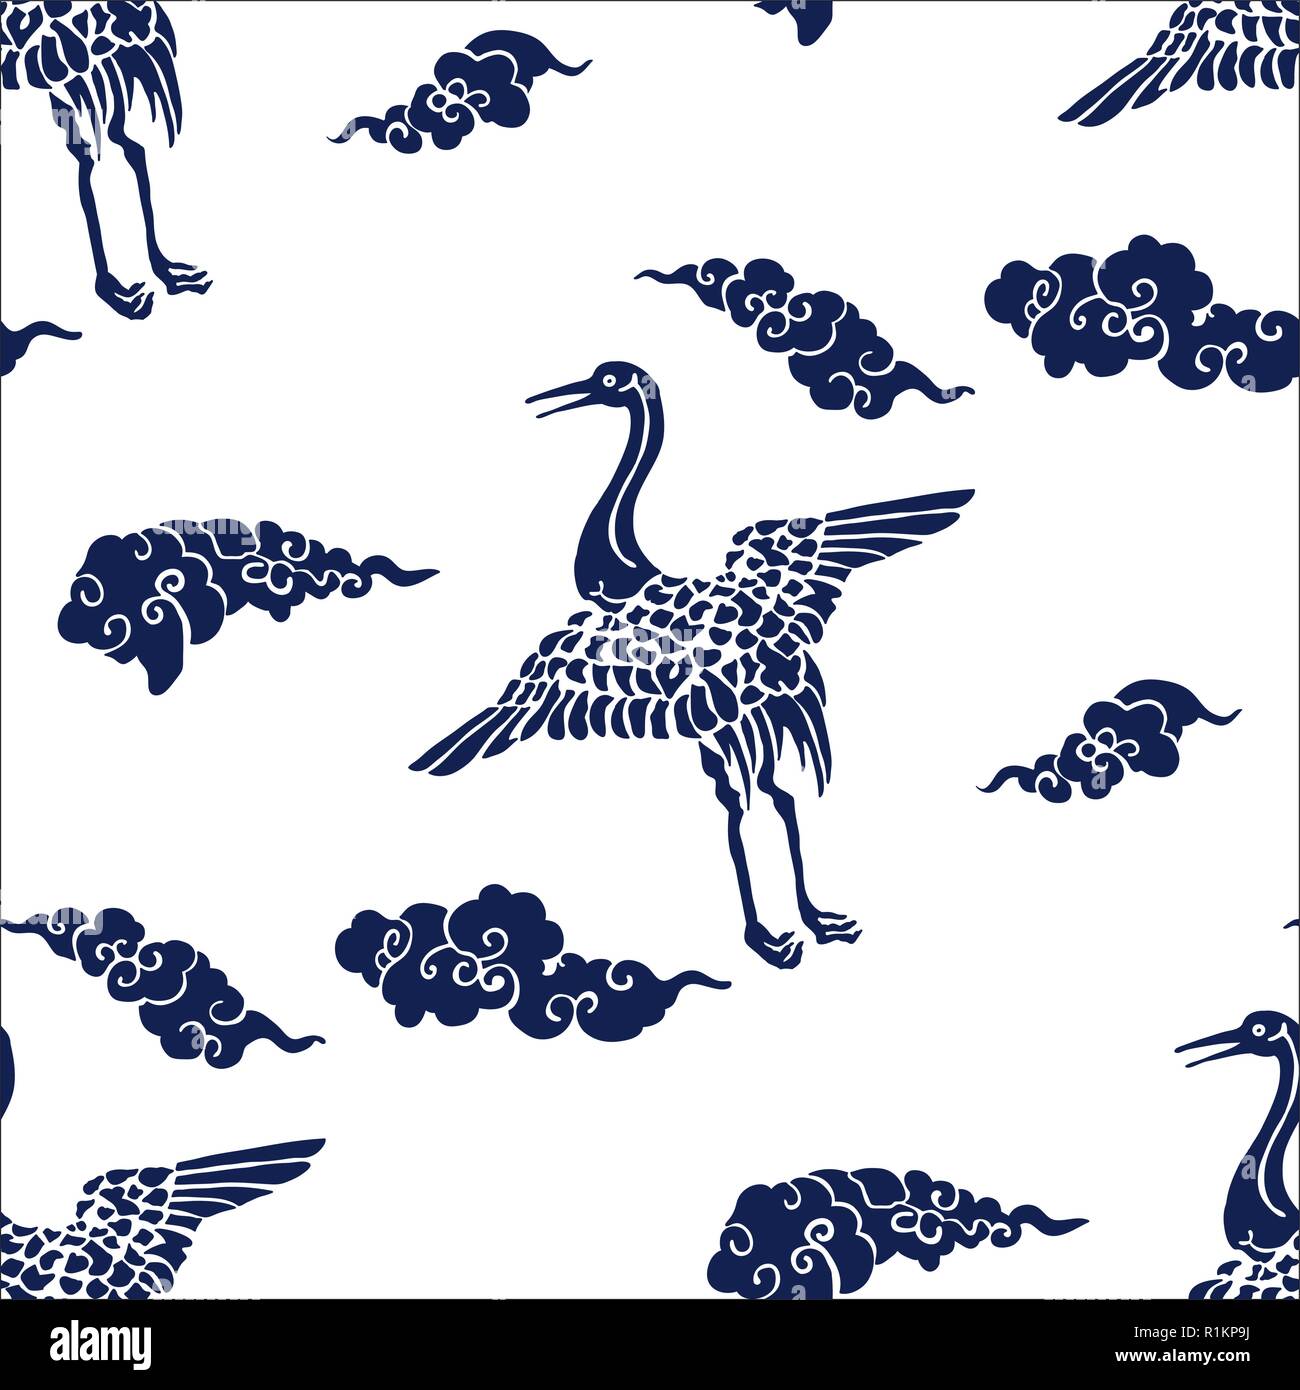 Indigo dye seamless  stencil pattern, Japanese traditional motif with cranes and clouds. Navy blue on ecru background. Stock Vector